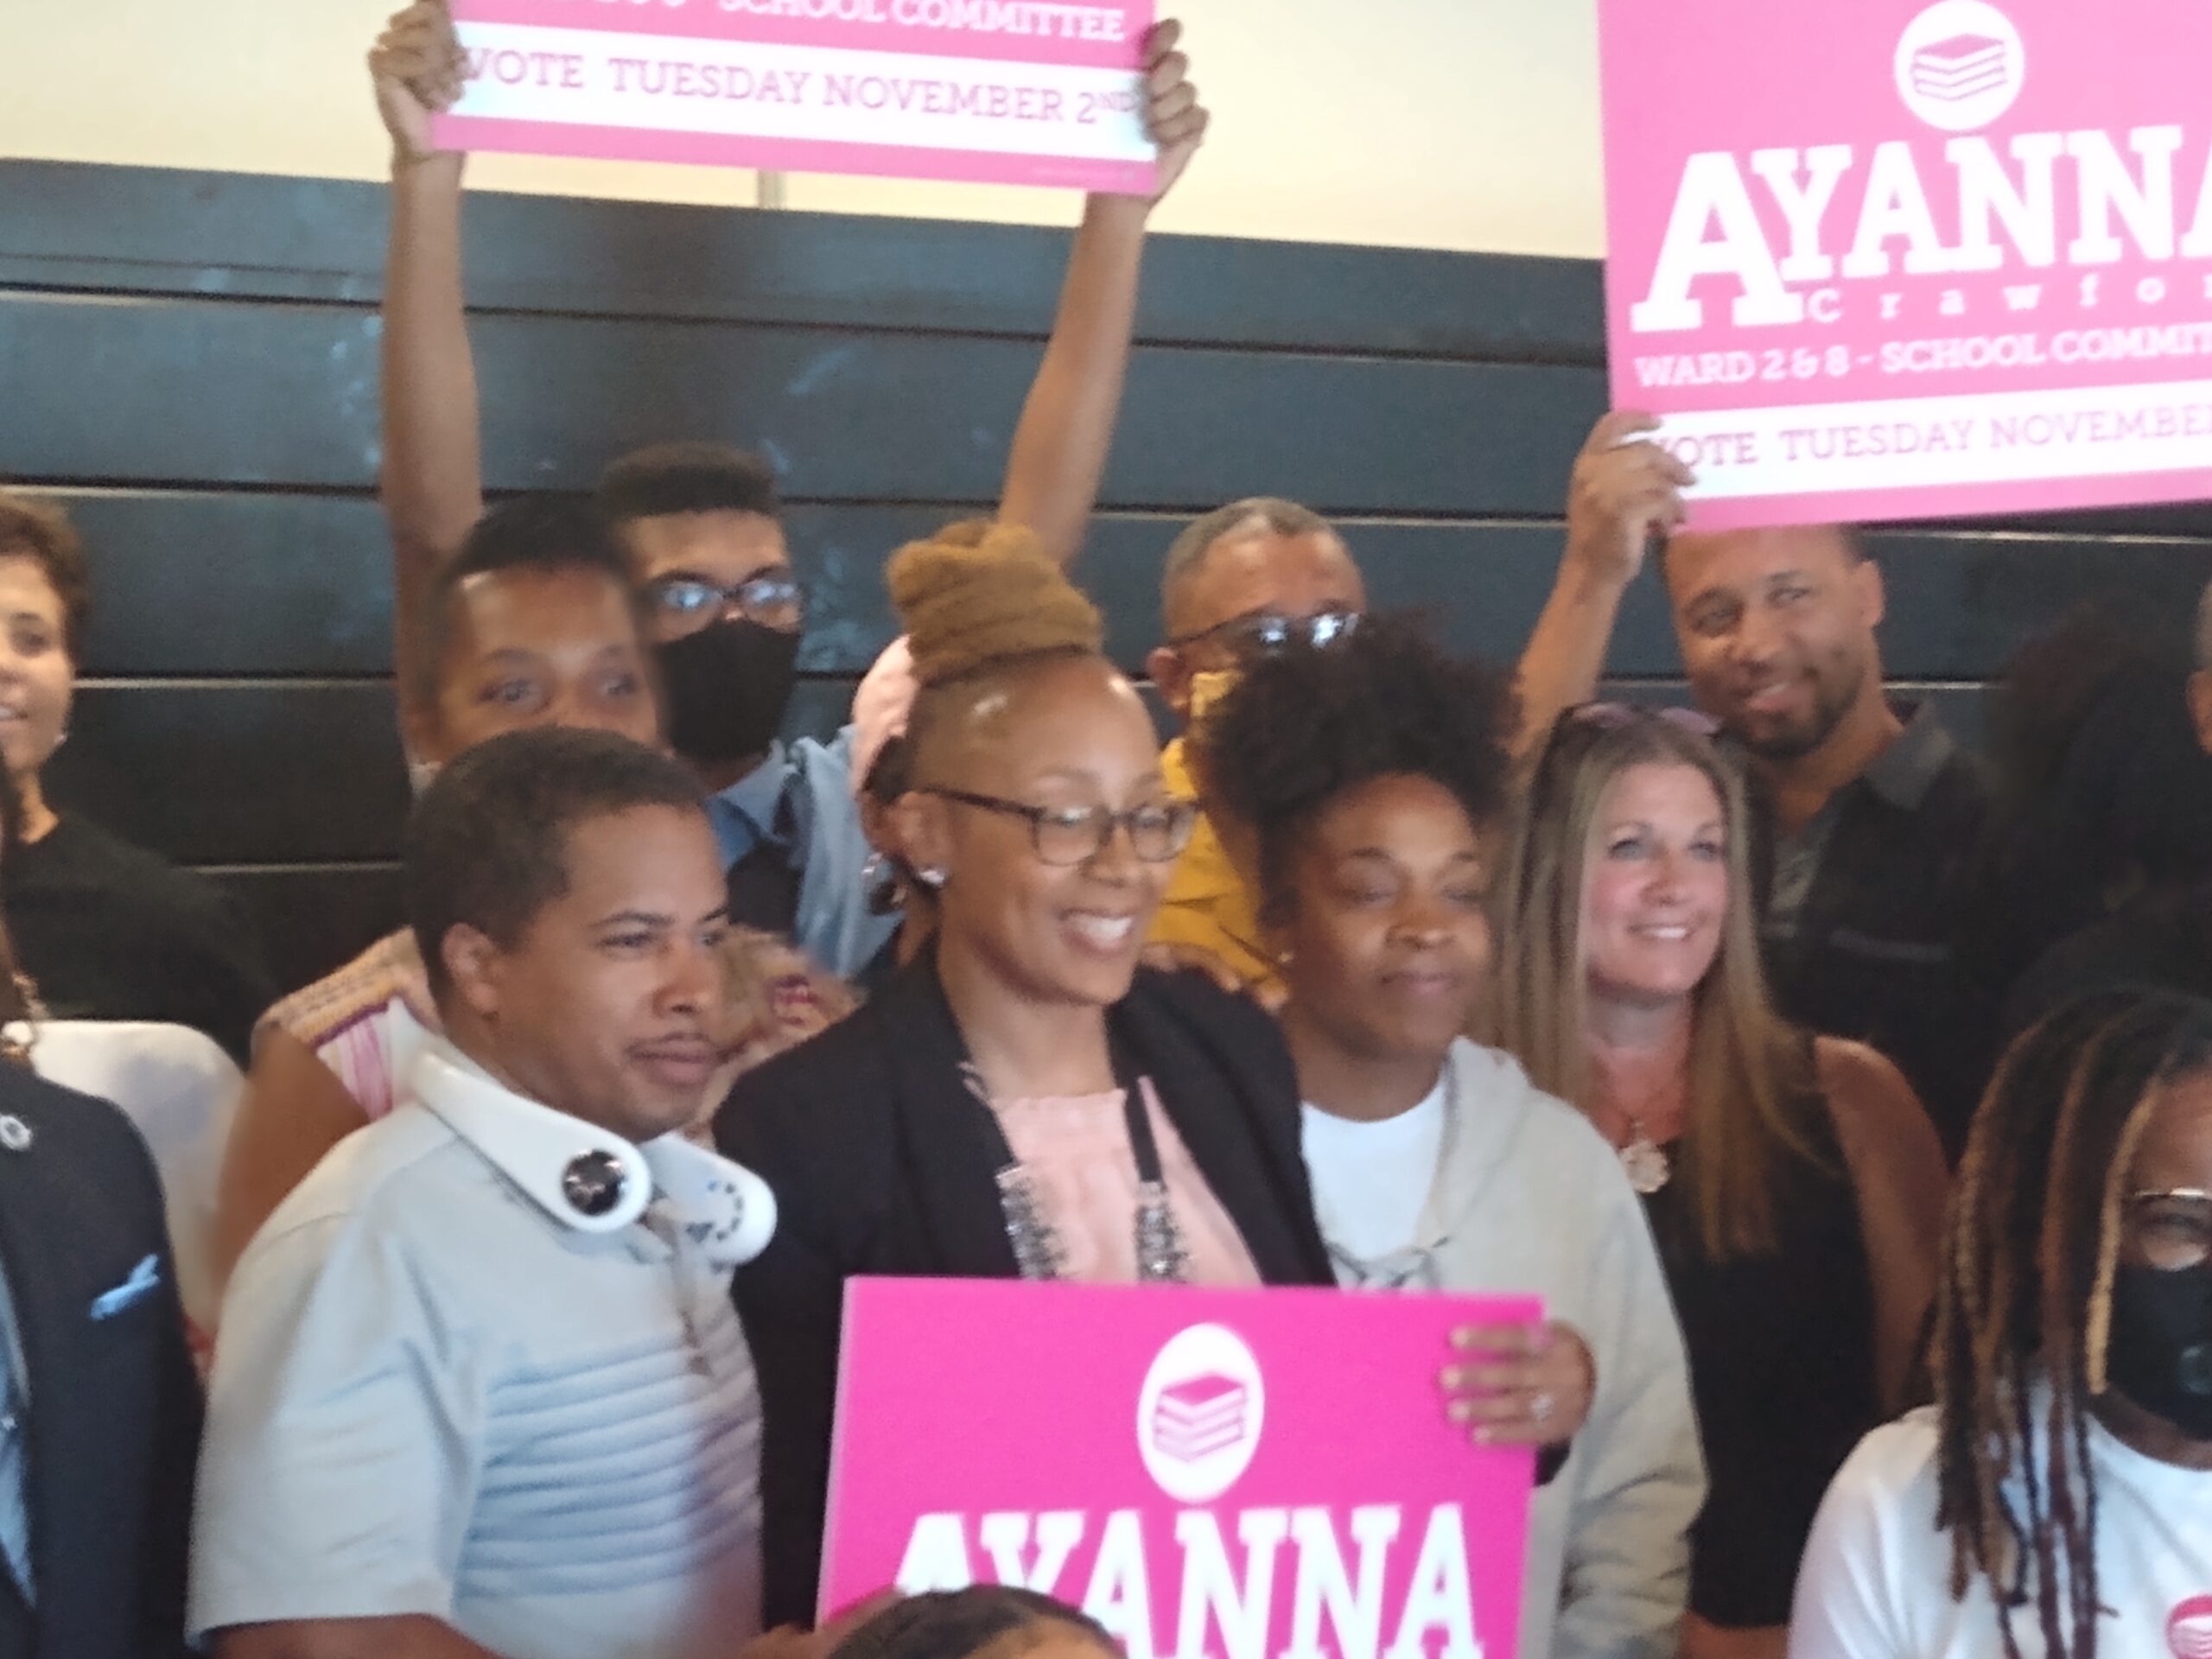 Ayanna Crawford and supporters